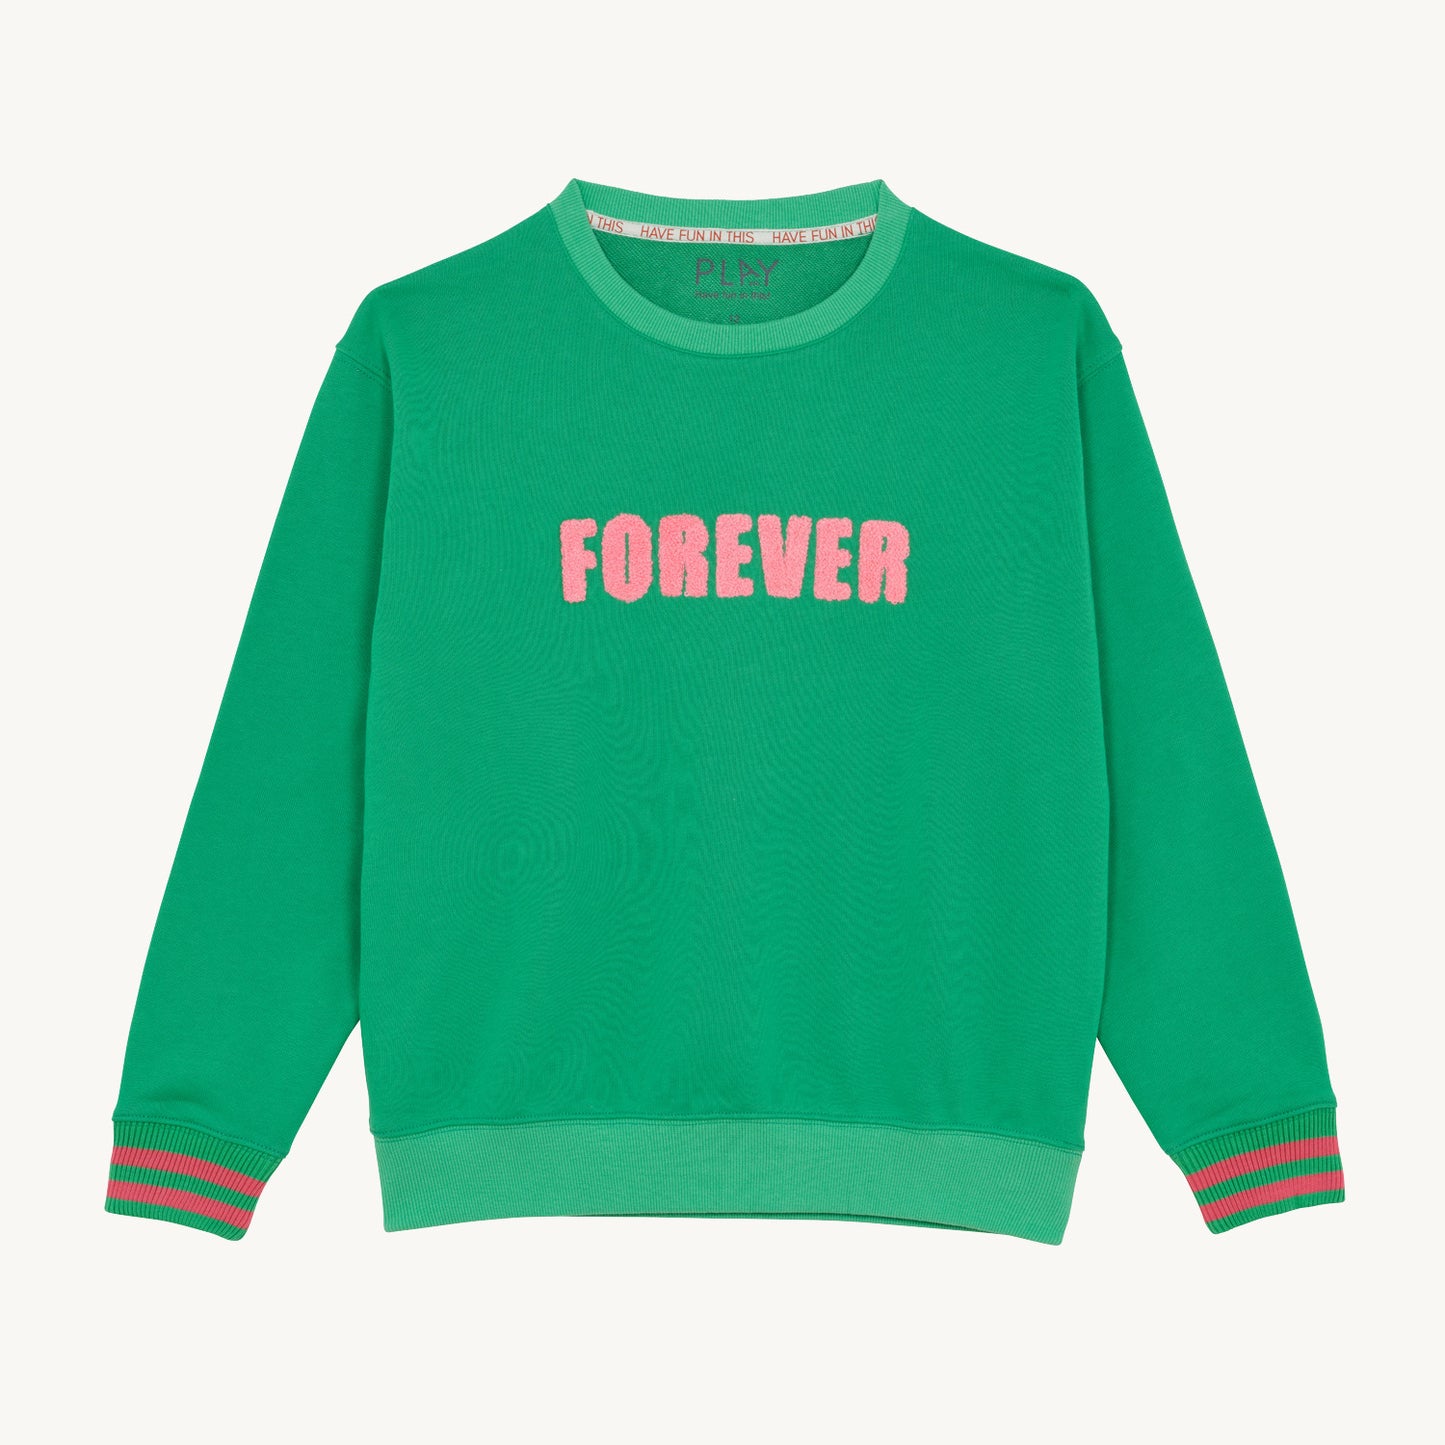 Forever Sweater